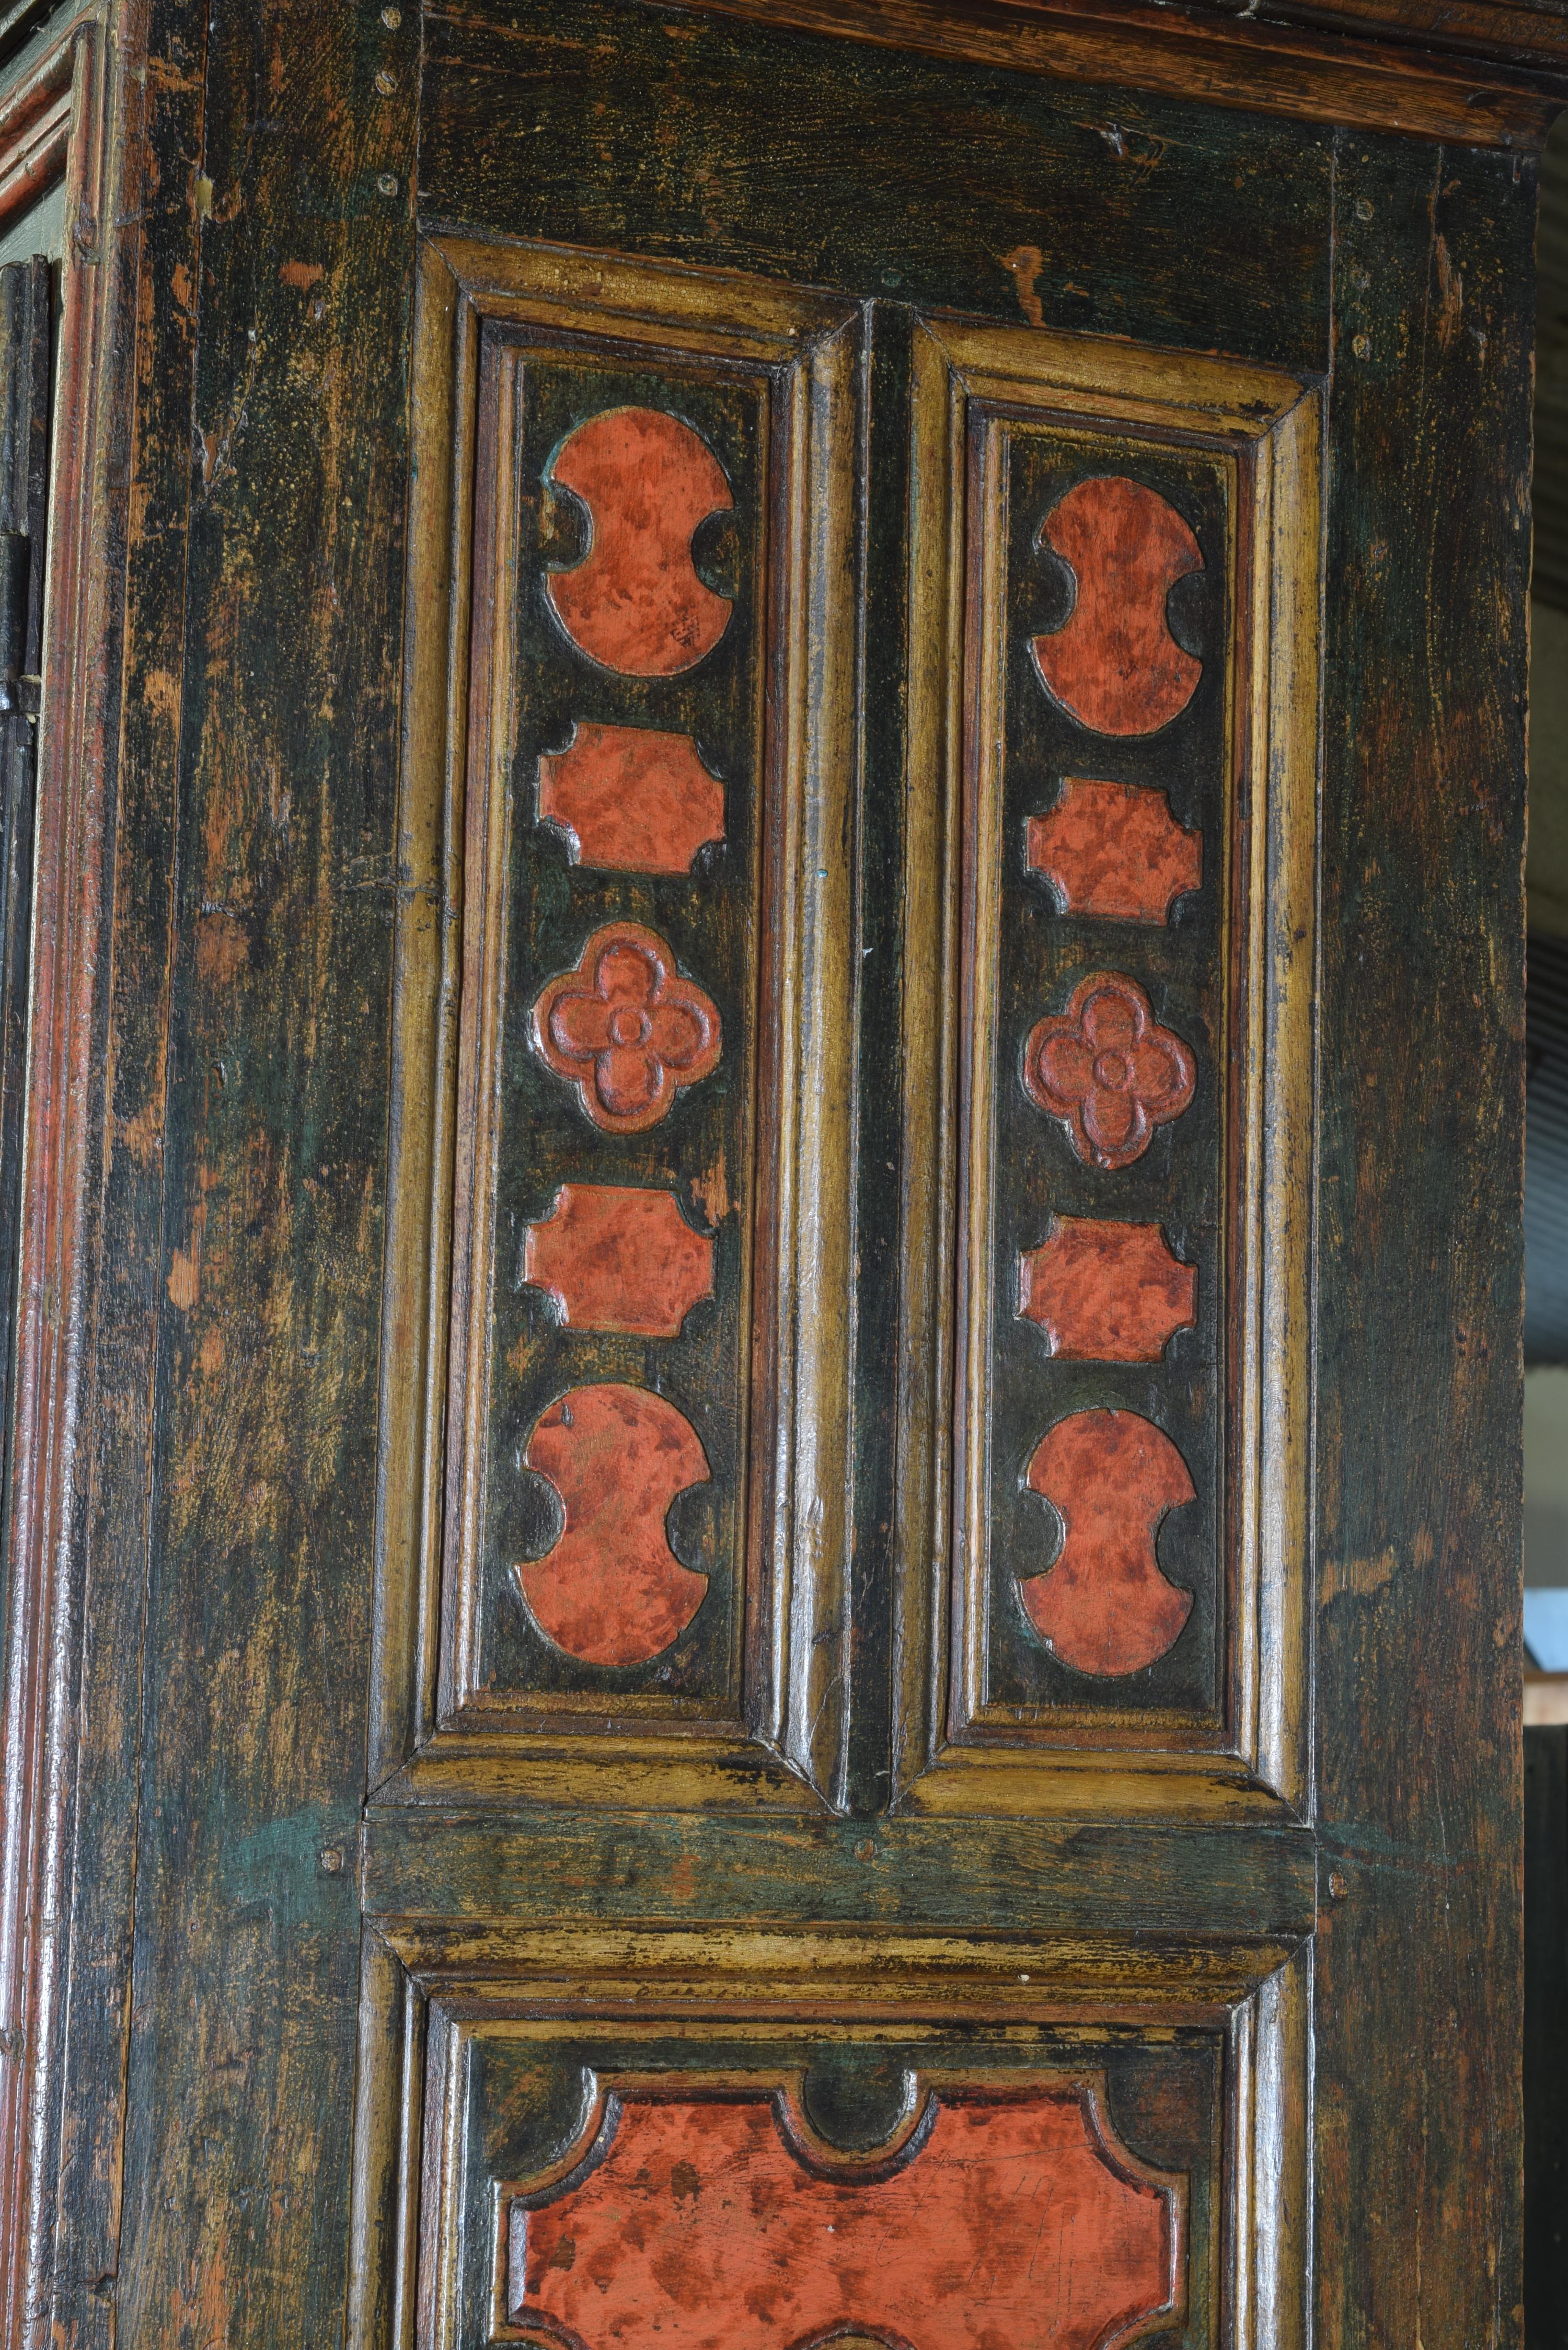 Polychromed Wood and Iron Cupboard. Spain, 1773. Dated 2